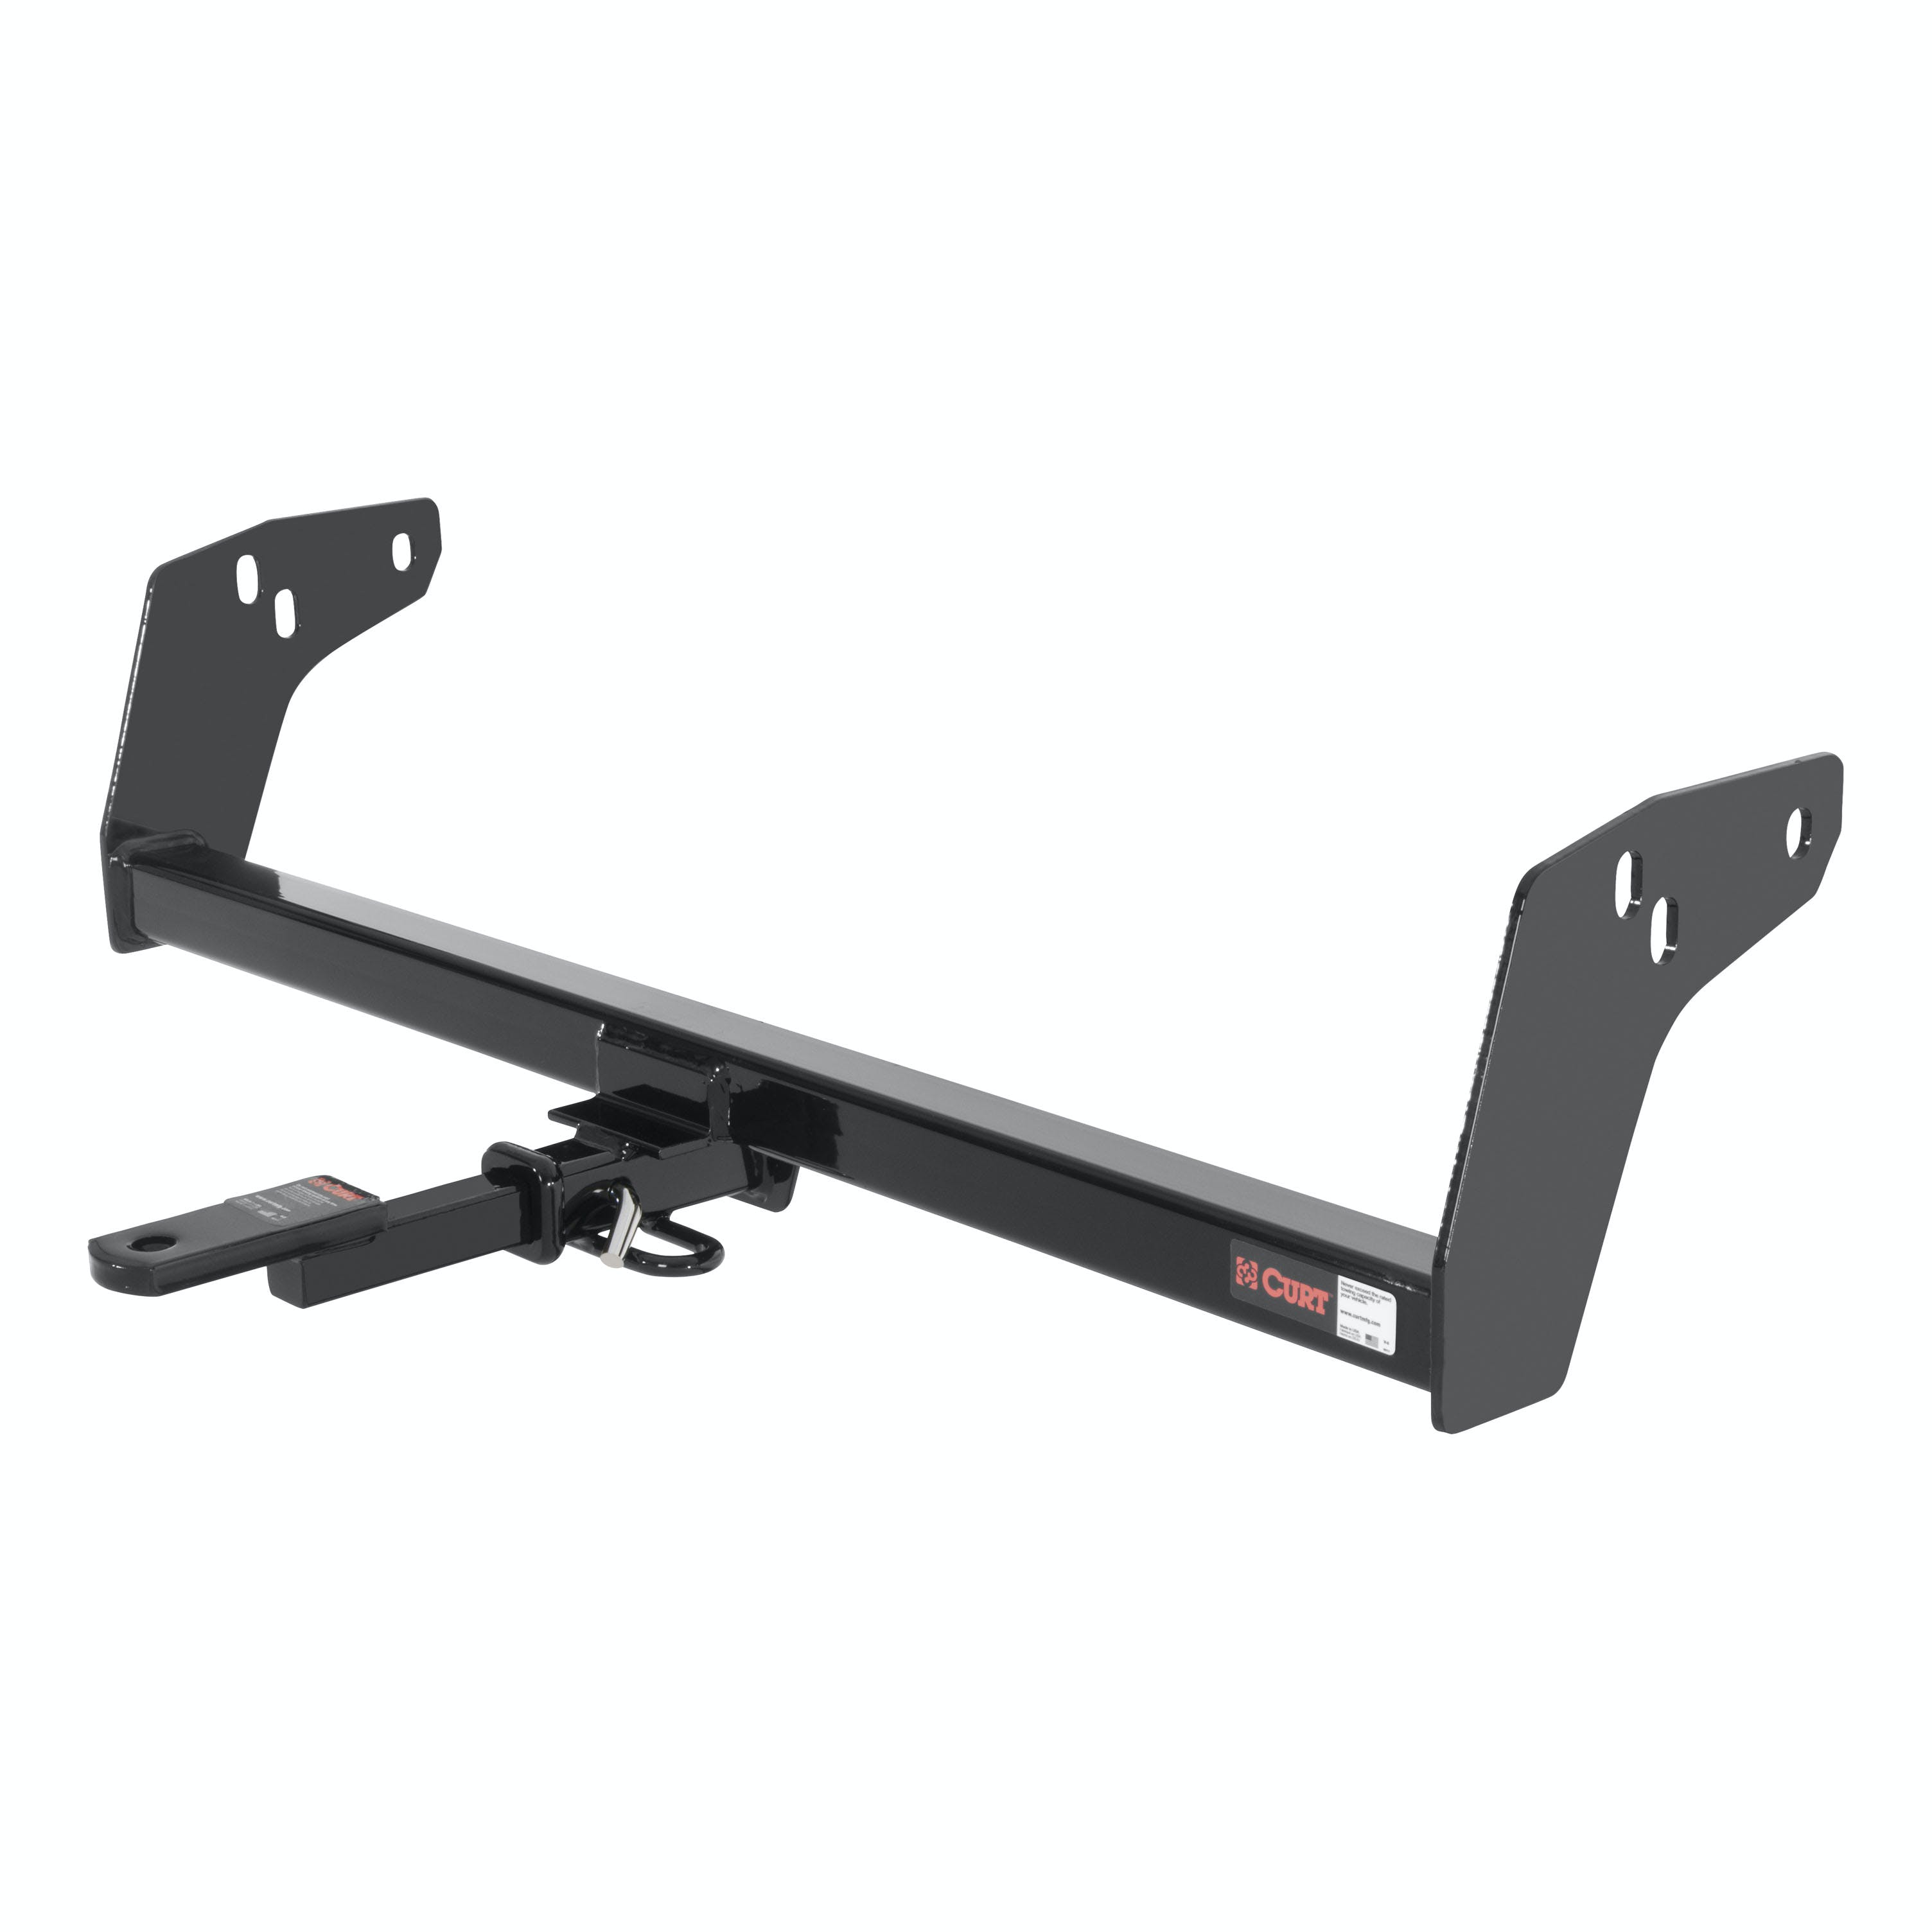 CURT 120113 Class 2 Trailer Hitch, 1-1/4 Ball Mount, Select Chevrolet S10, GMC S15, Sonoma